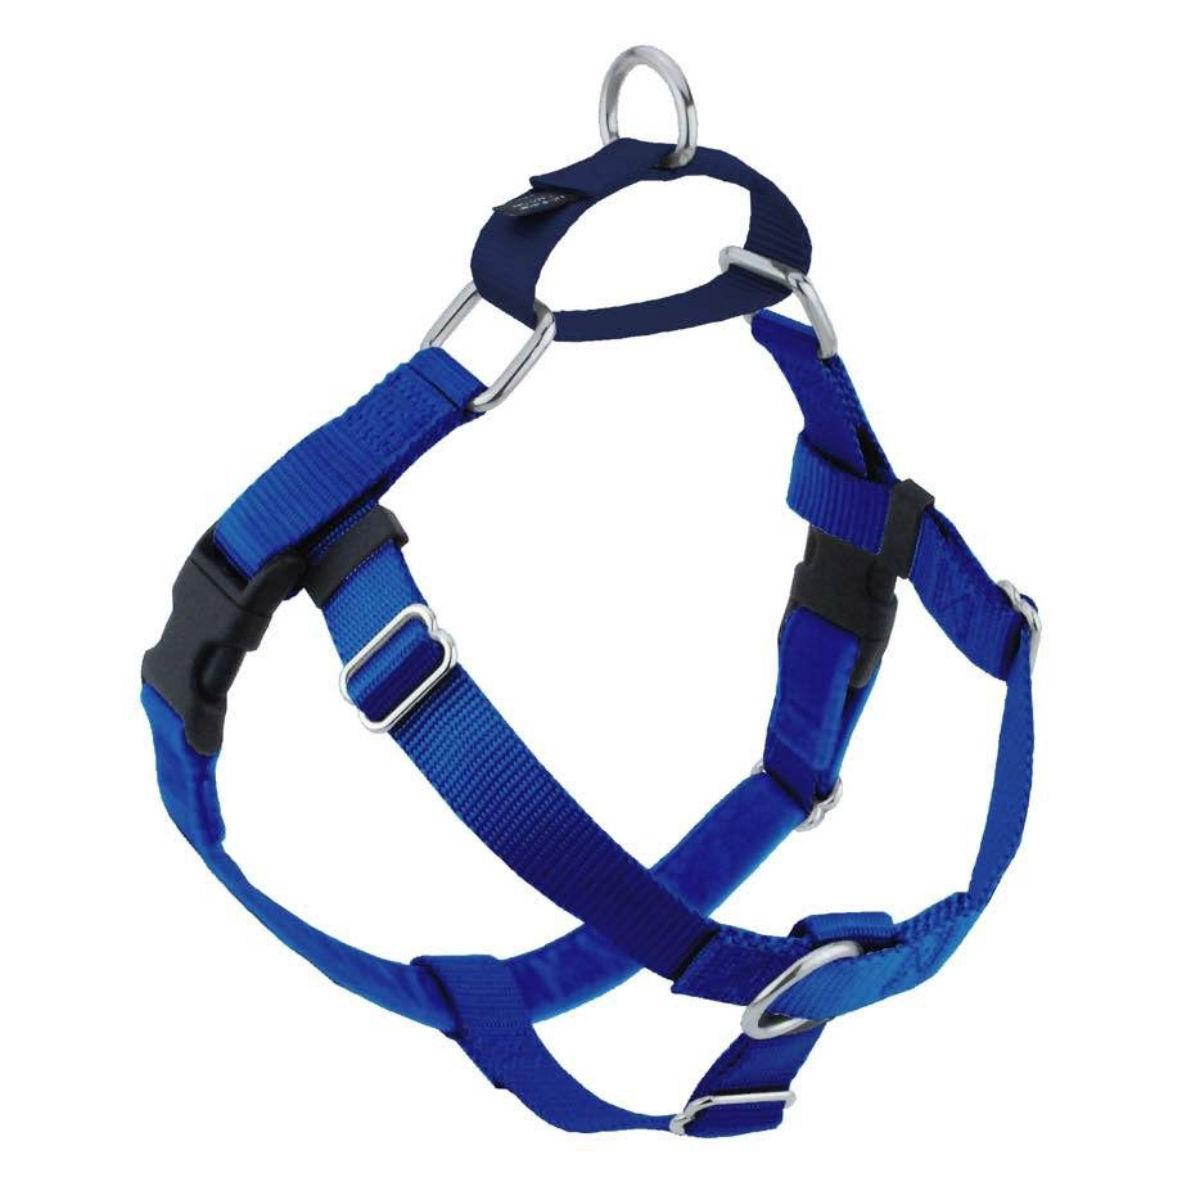 2 Hounds Design No-Pull Dog Harness Deluxe Training Package - Royal Blue and Navy